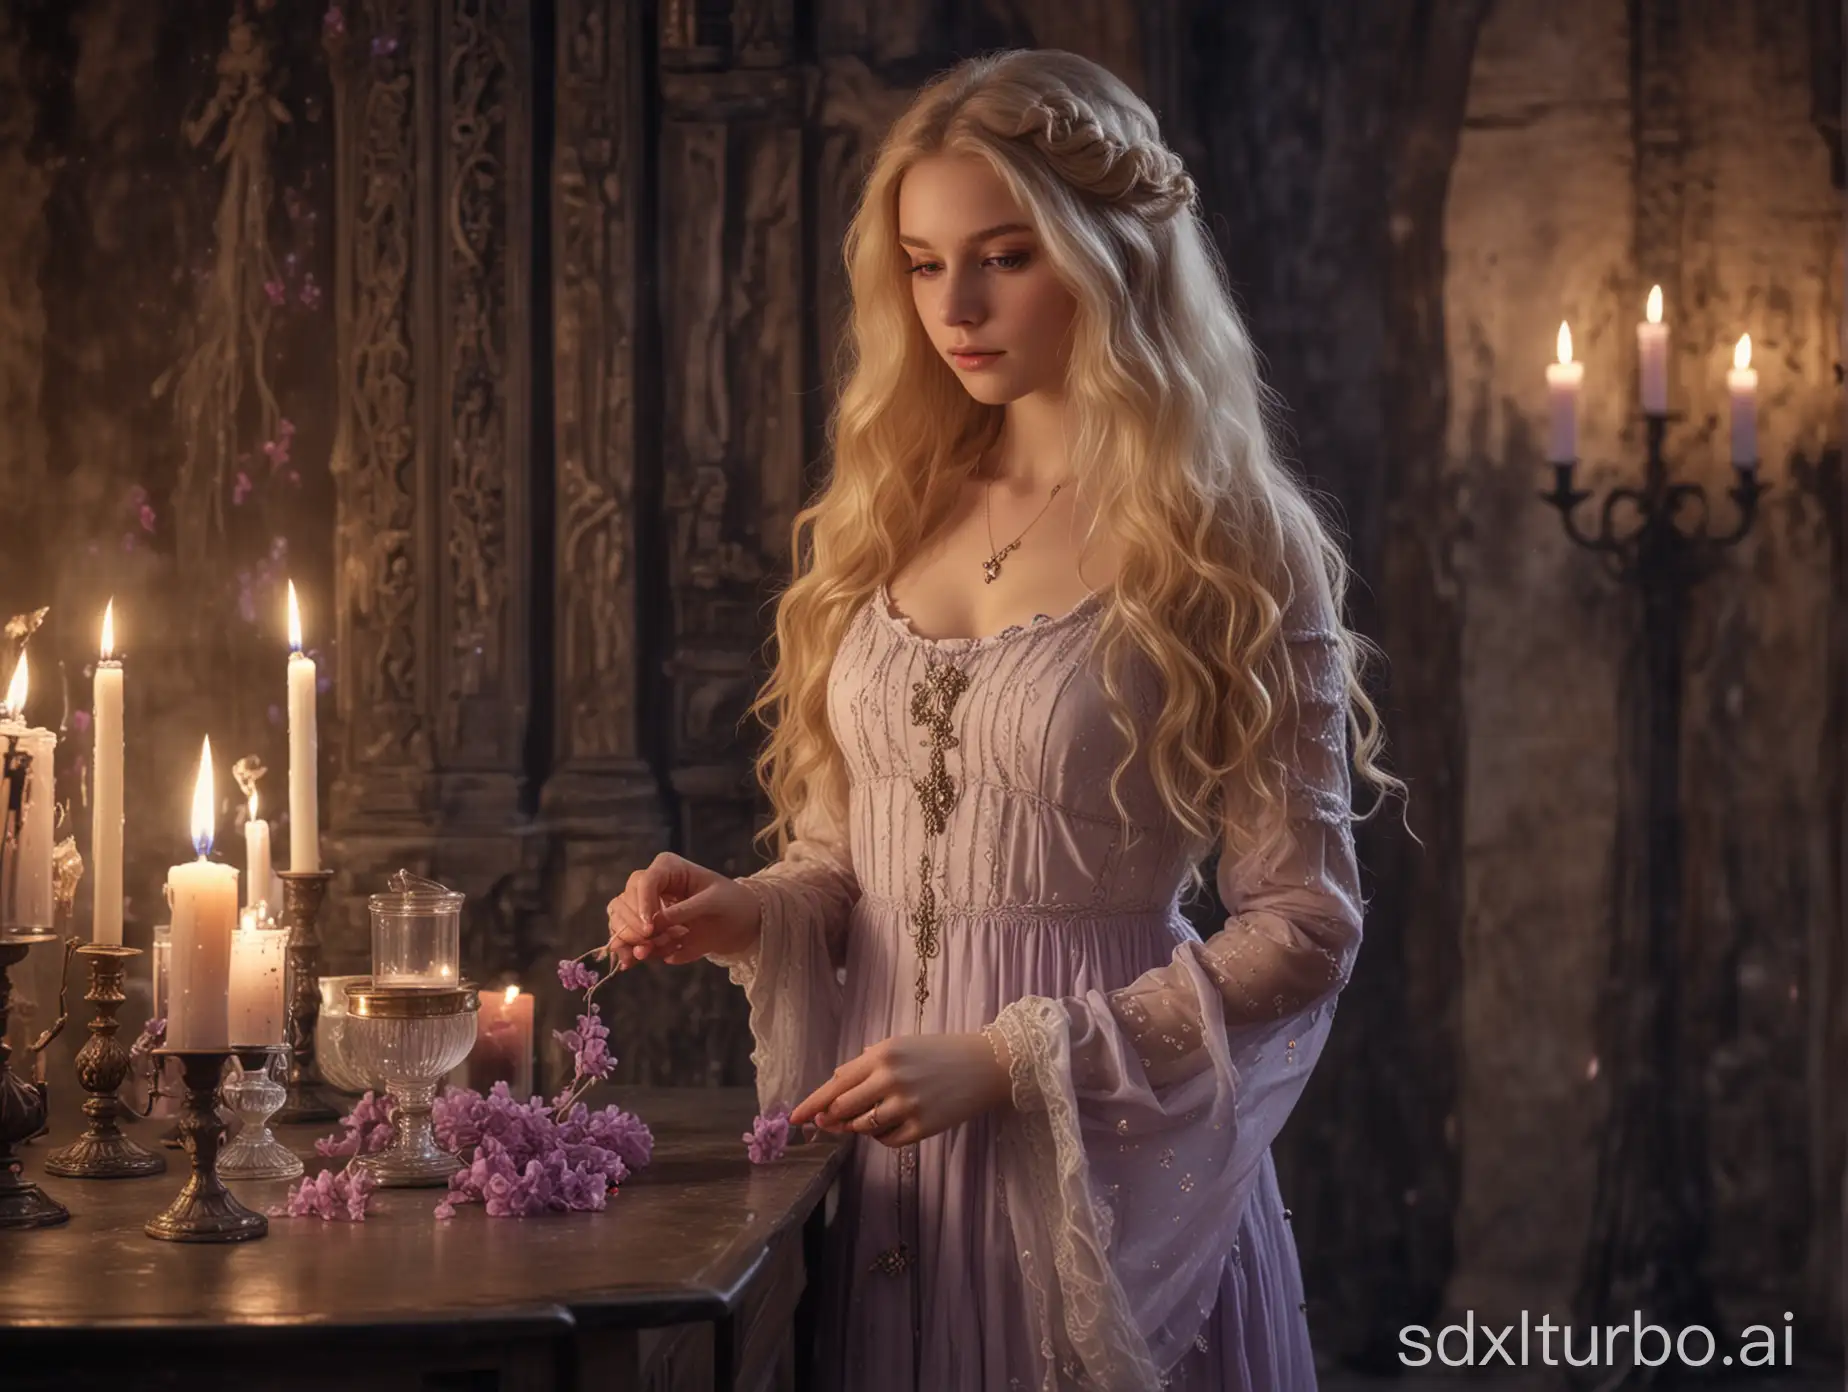 A beautiful girl with long blonde hair, slightly curling at the ends, wearing a delicate pale medieval dress with a deep bodice looks at a transparent cup with lilac colored  water, in a mysterious room with candles and mystical artifacts.